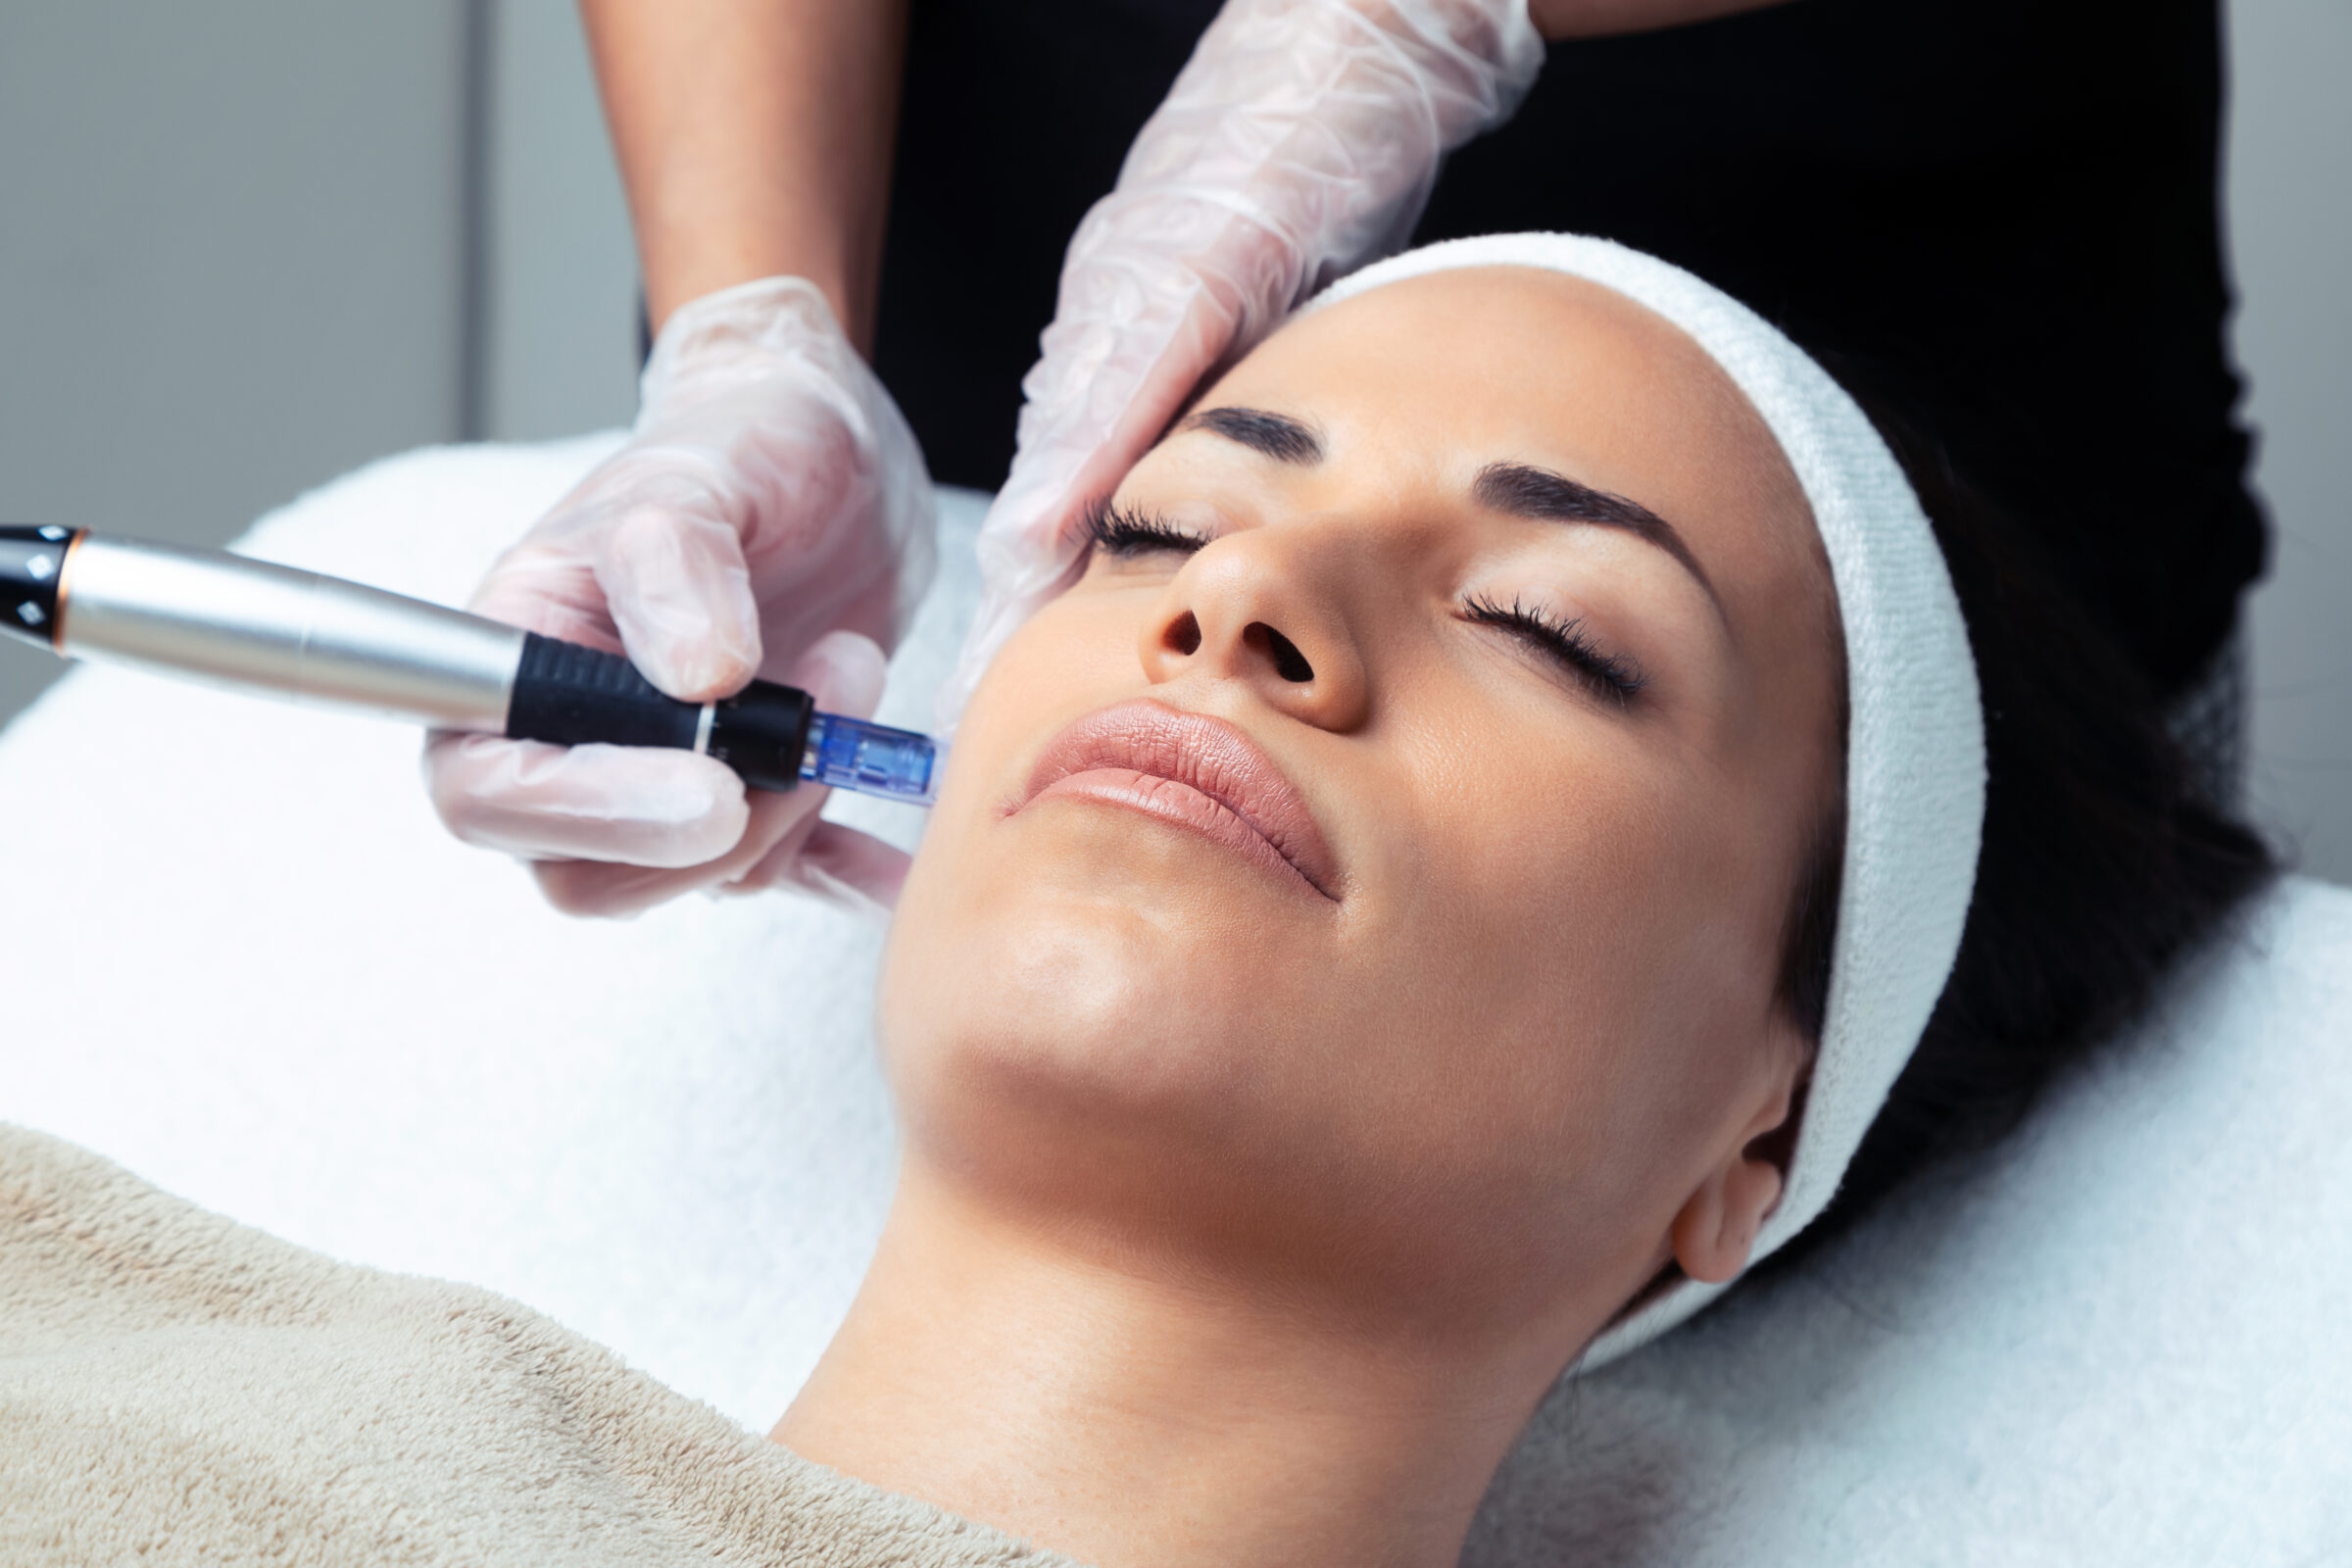 An African American woman getting RF Microneedling treatment on her face